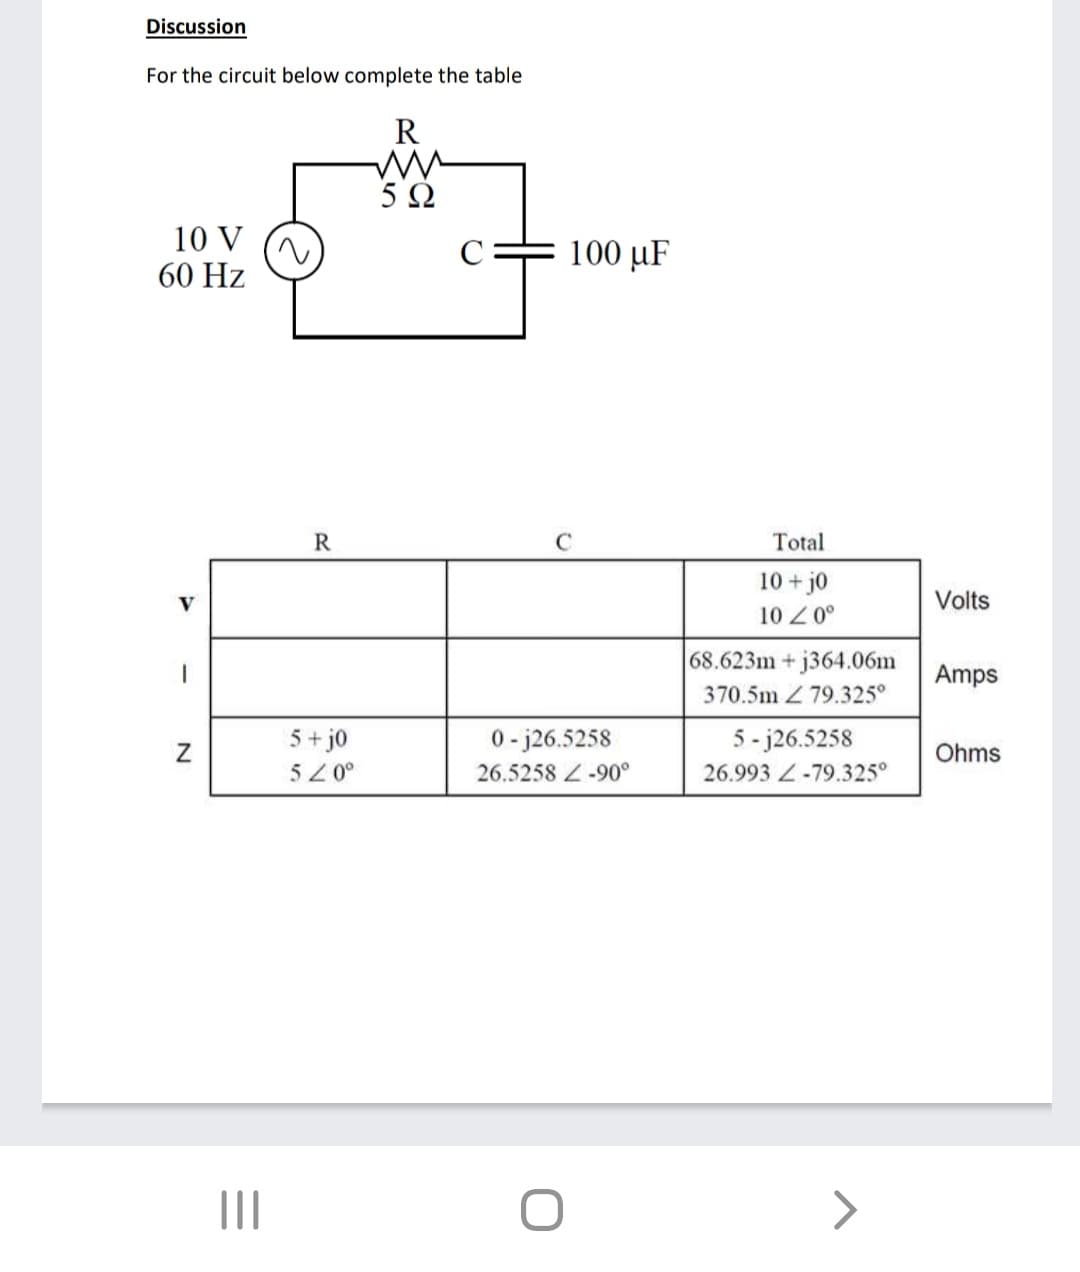 Discussion
For the circuit below complete the table
R
5 Ω
10 V
60 Hz
100 μF
R
Total
10+j0
10 0°
Volts
68.623m+ j364.06m
Amps
370.5m Z 79.325°
5+ j0
0- j26.5258
5 - j26.5258
Ohms
52 0°
26.5258 Z-90°
26.993 Z-79.325°
N
